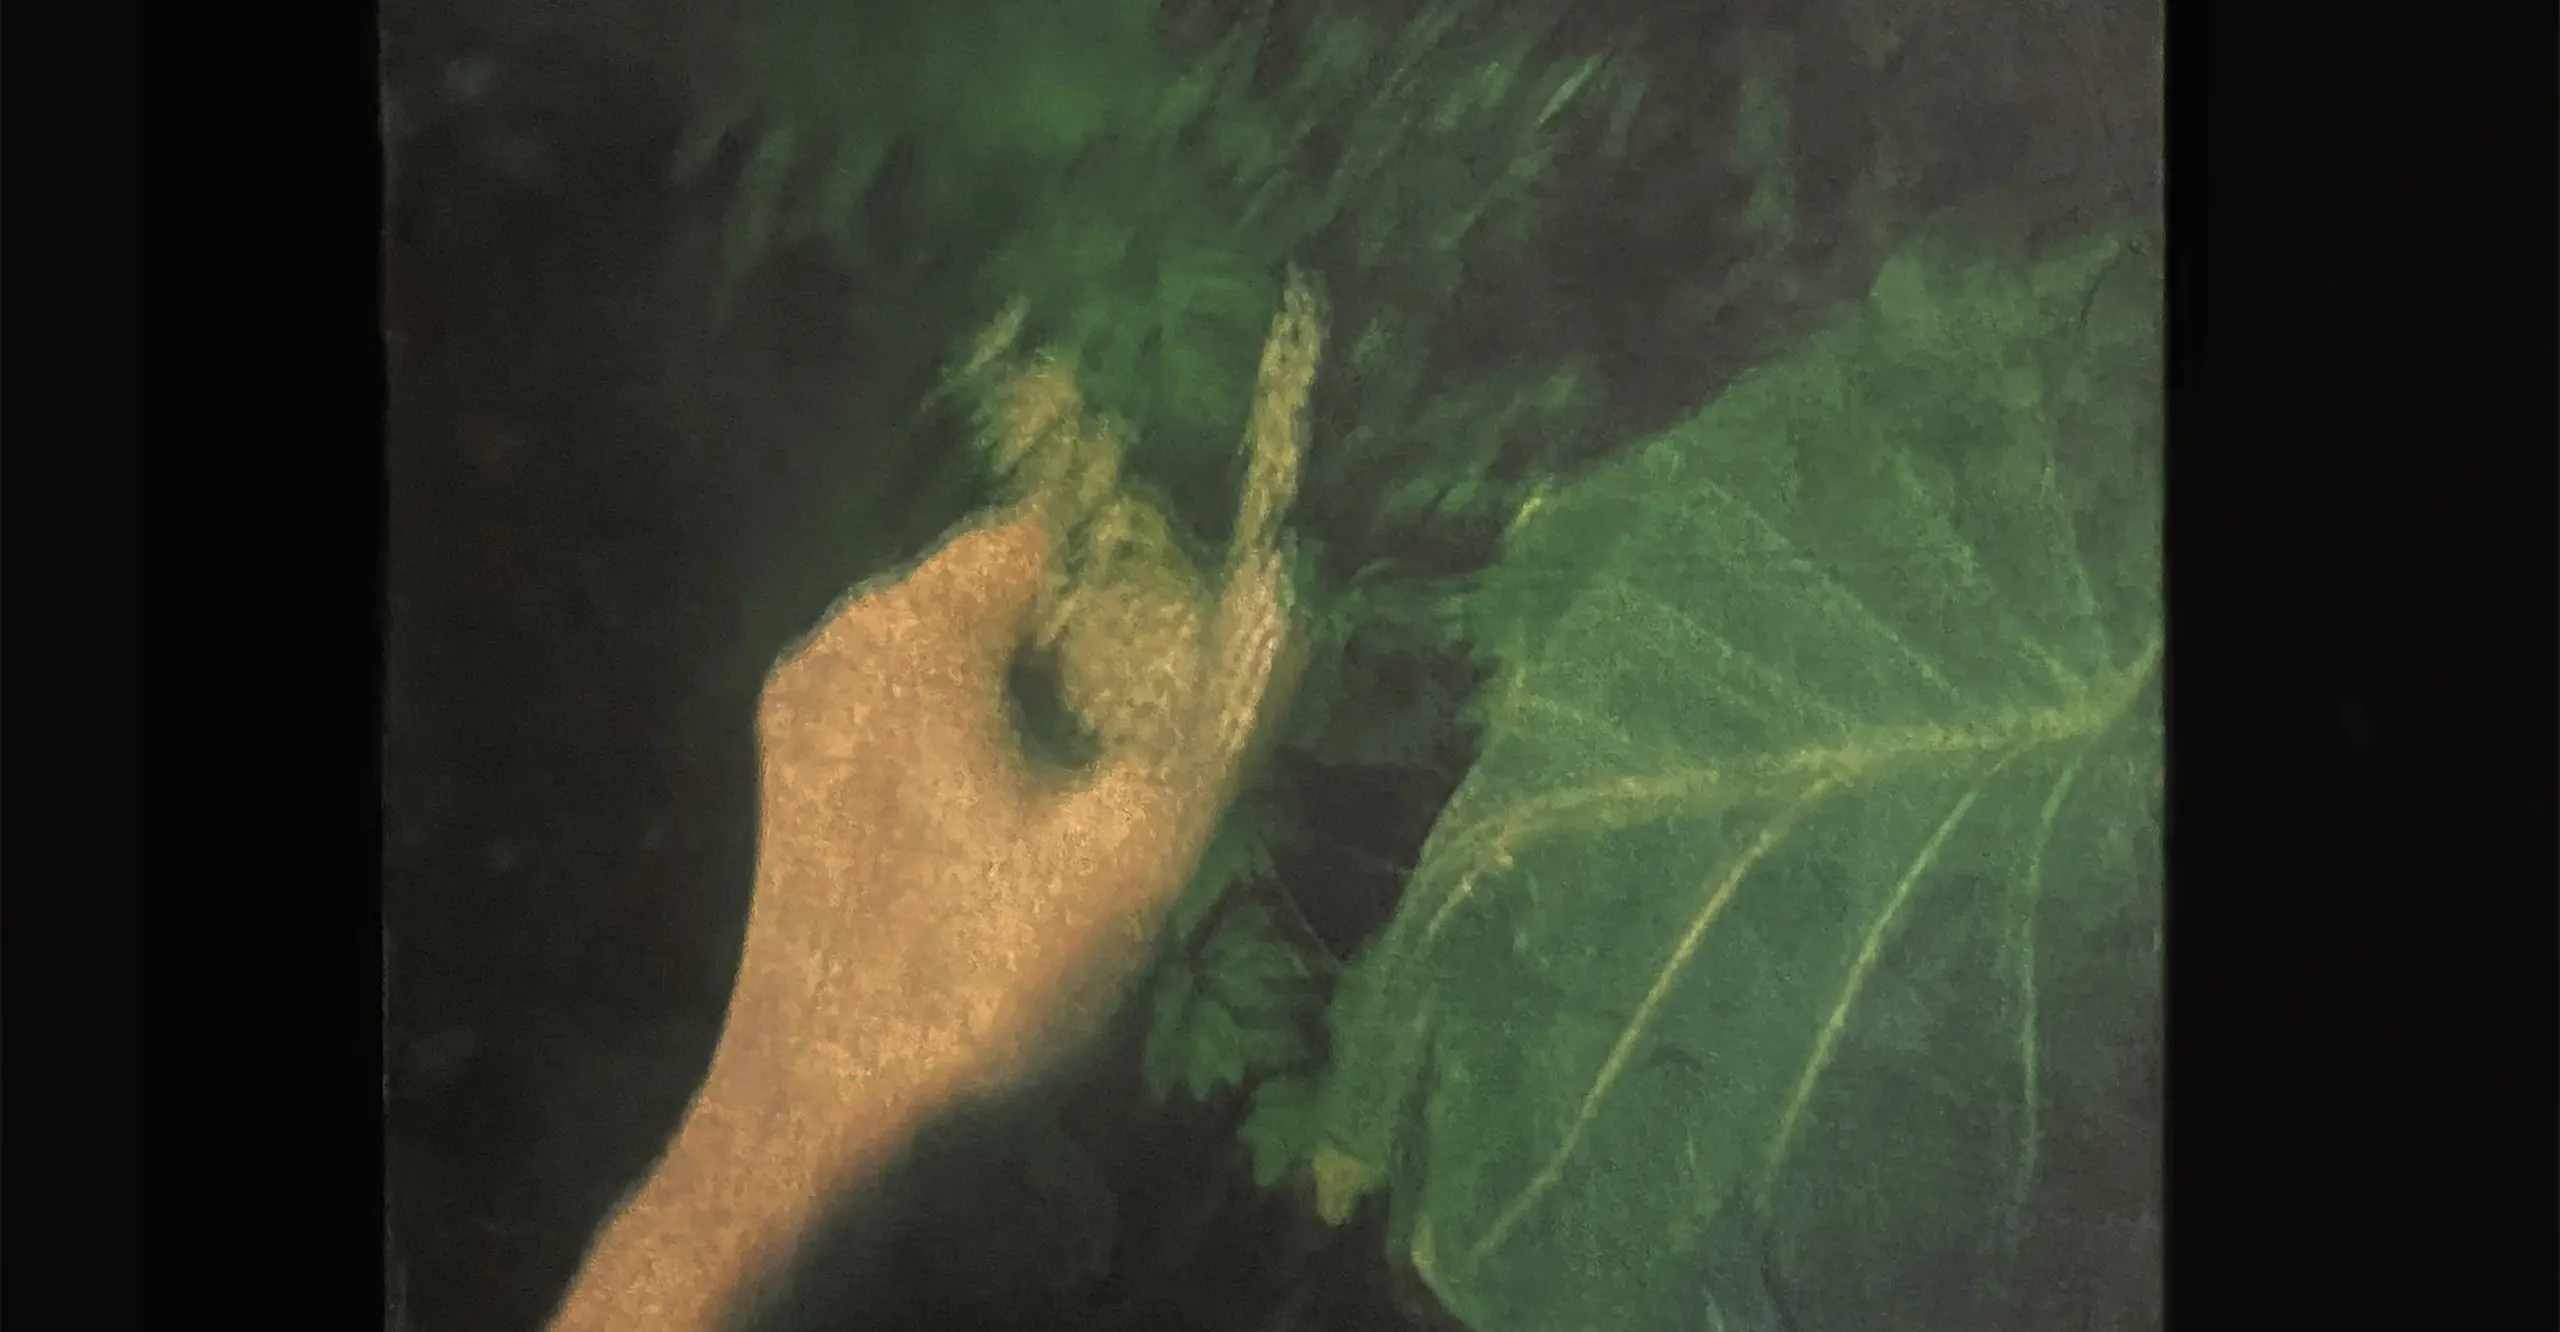 Colour photograph of an outstretched arm holding on to green leaves